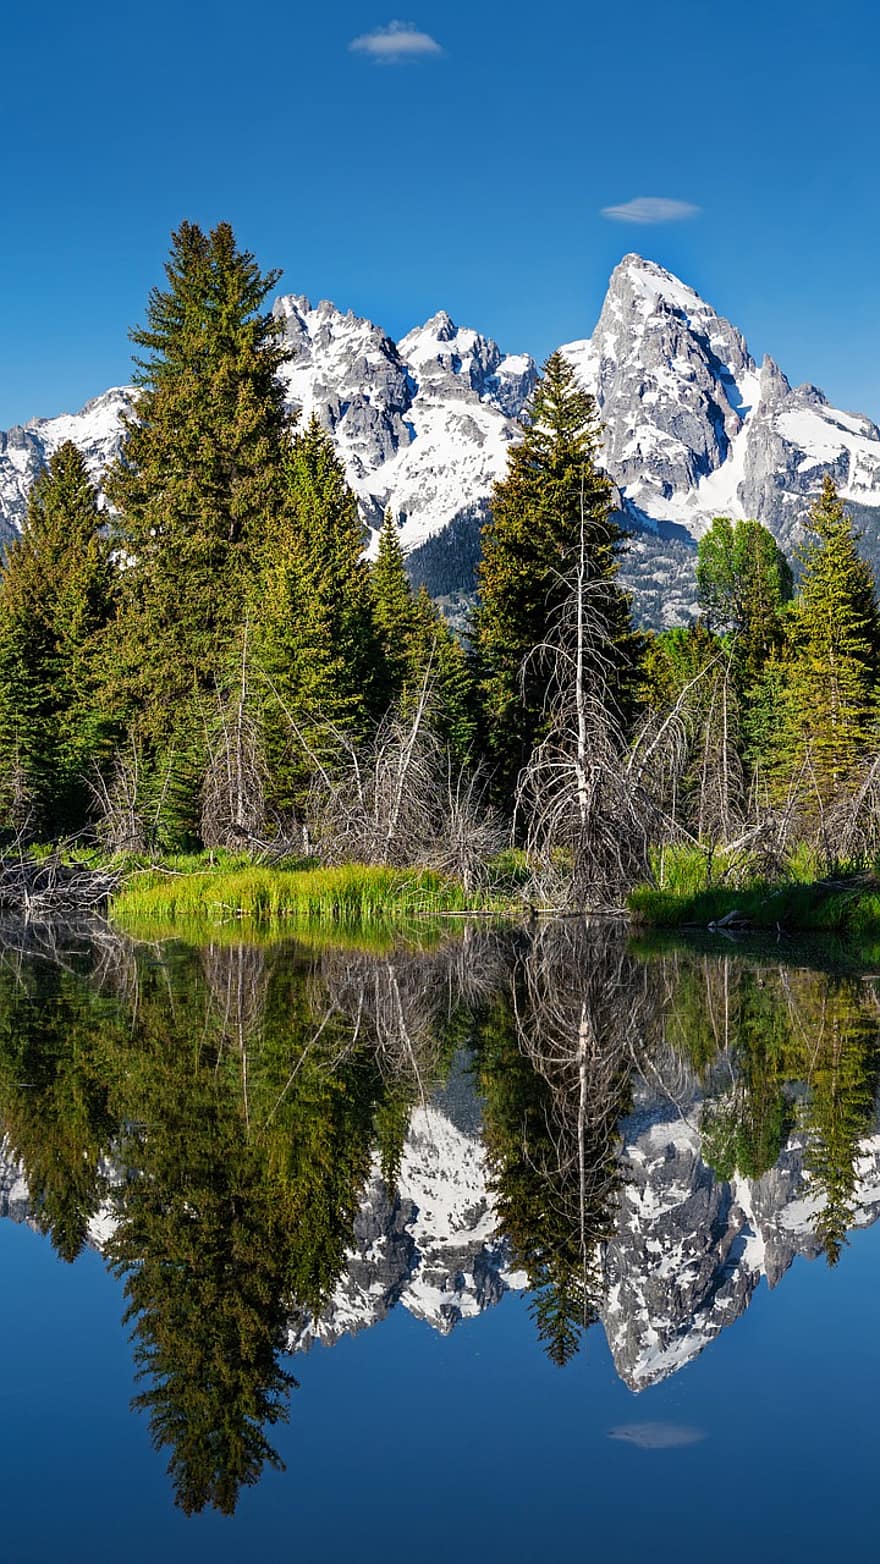 Mountains, Lake, Reflection, Nature, Landscape, River, Forest, Water, Sky, Trees, Wyoming